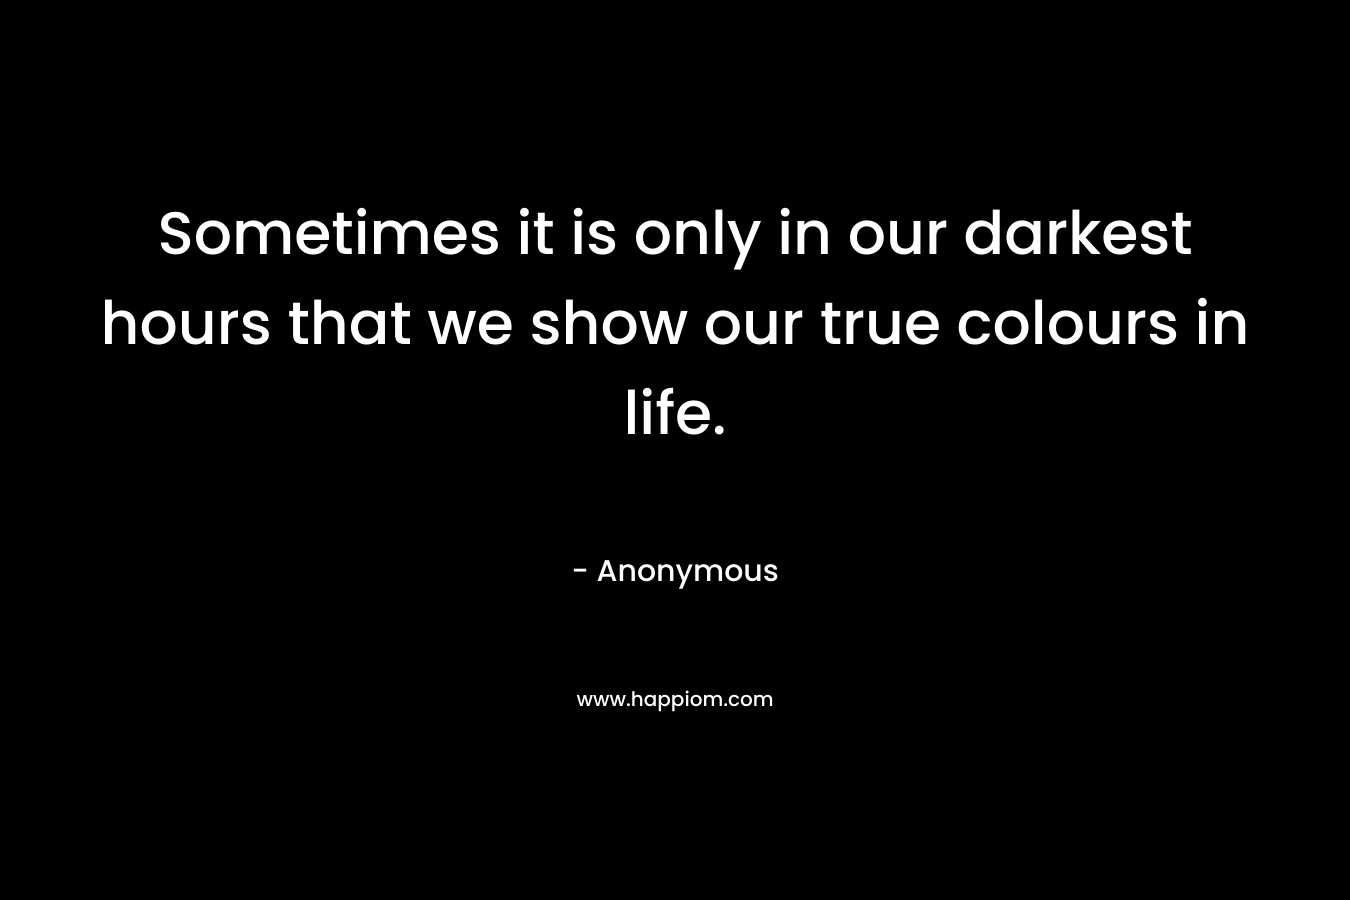 Sometimes it is only in our darkest hours that we show our true colours in life. – Anonymous